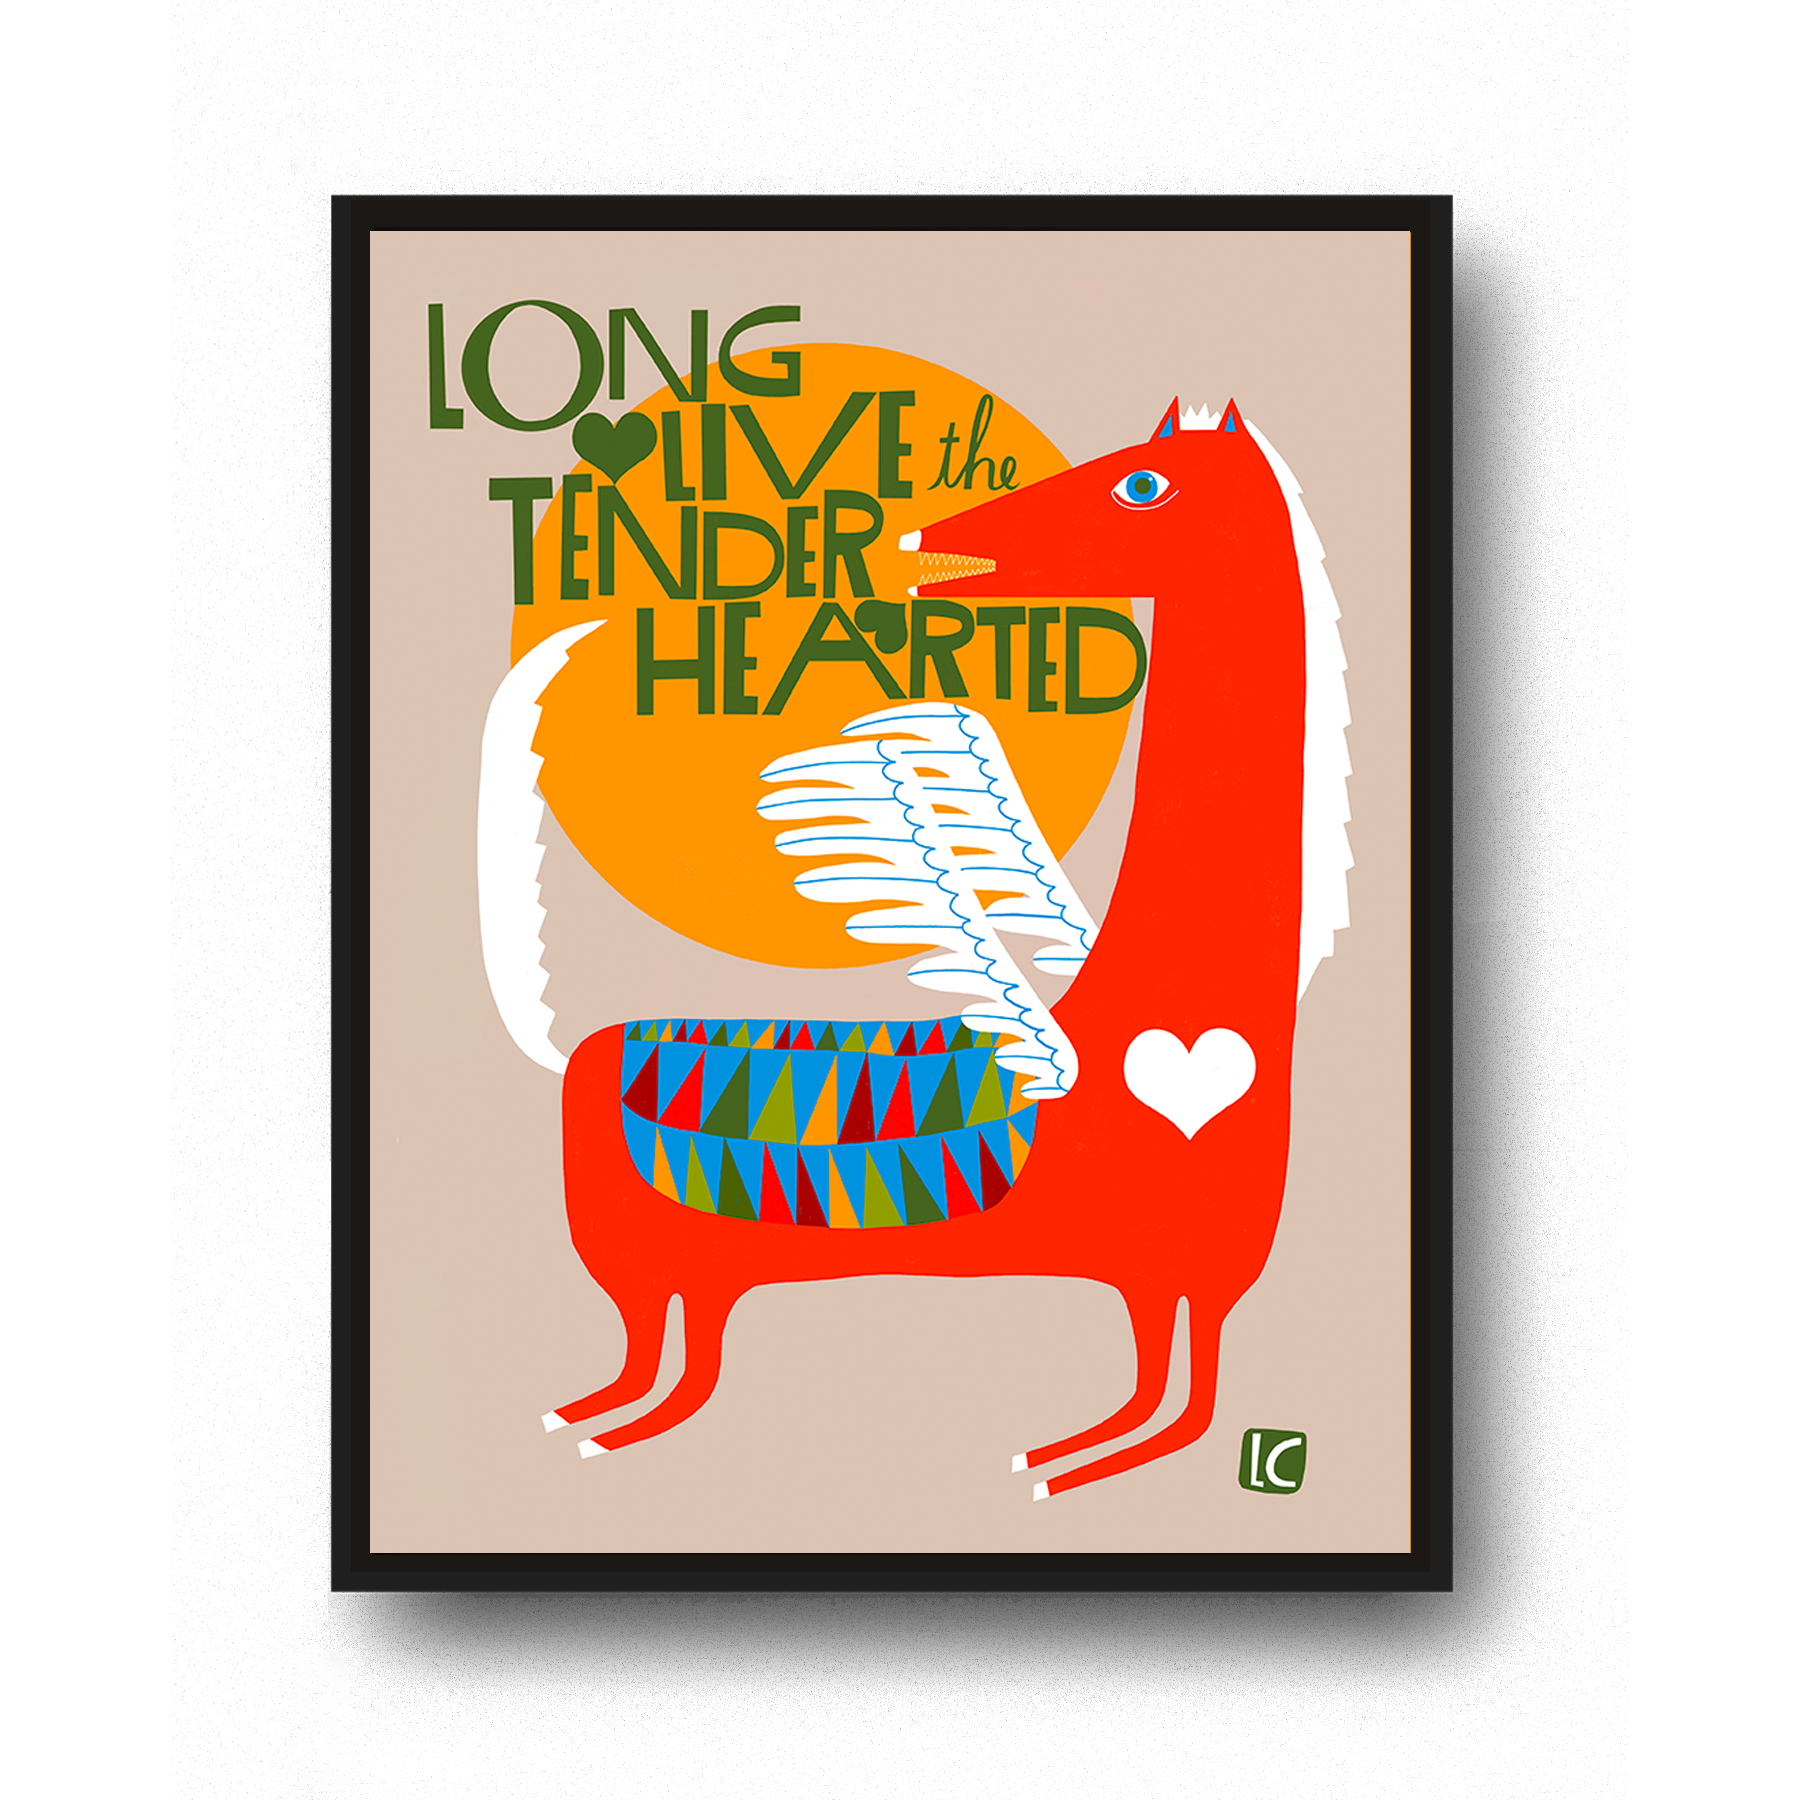 Long Live the Tenderhearted by Lisa Congdon